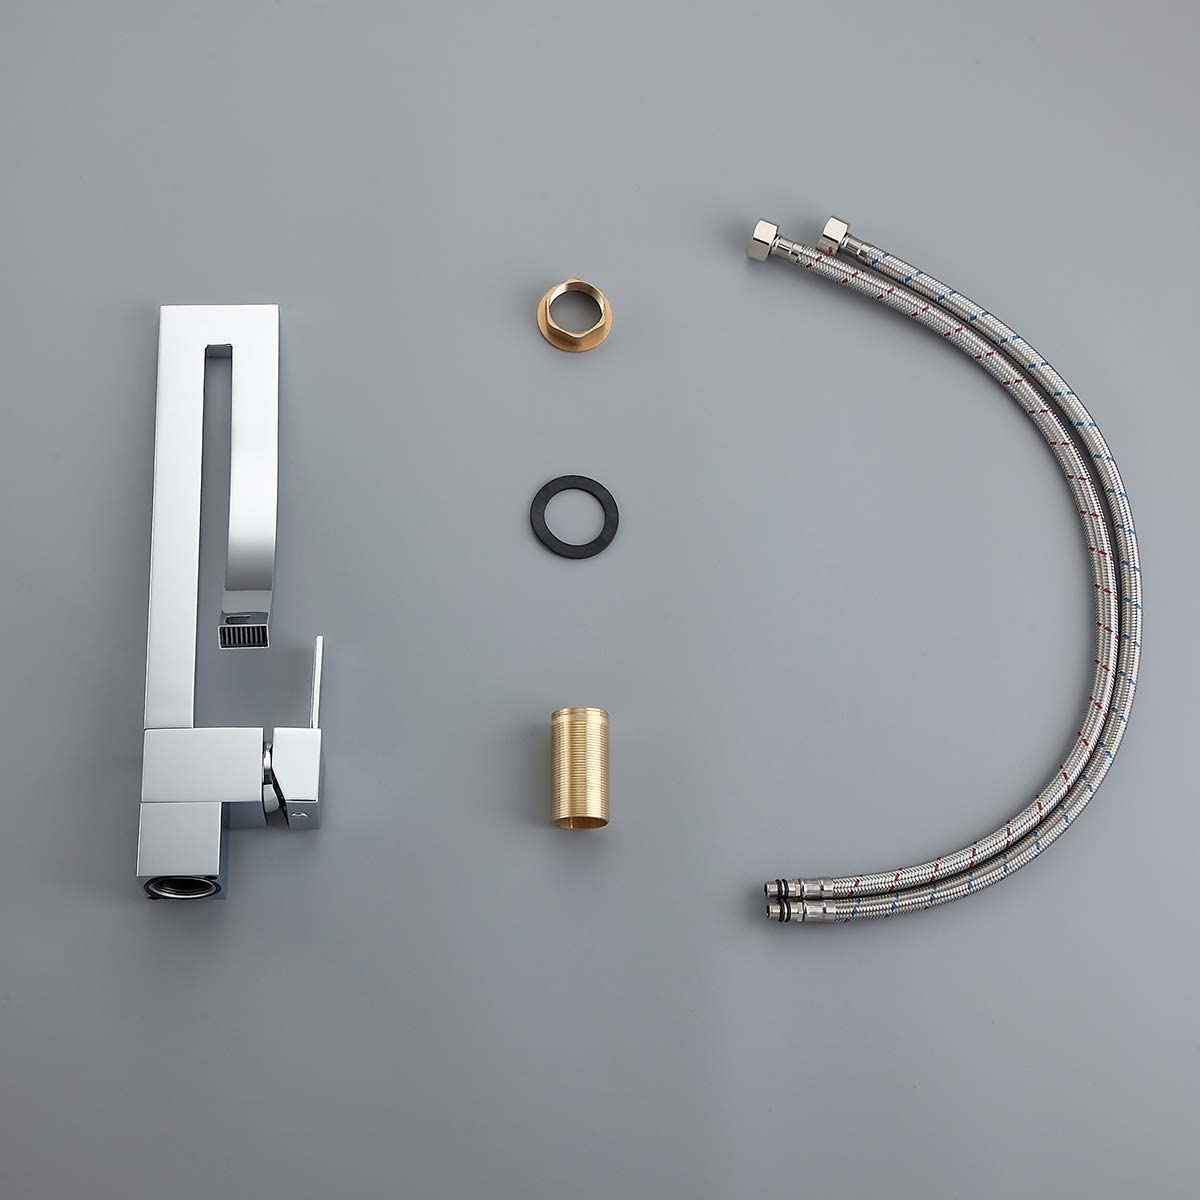 What are the faucet accessories？